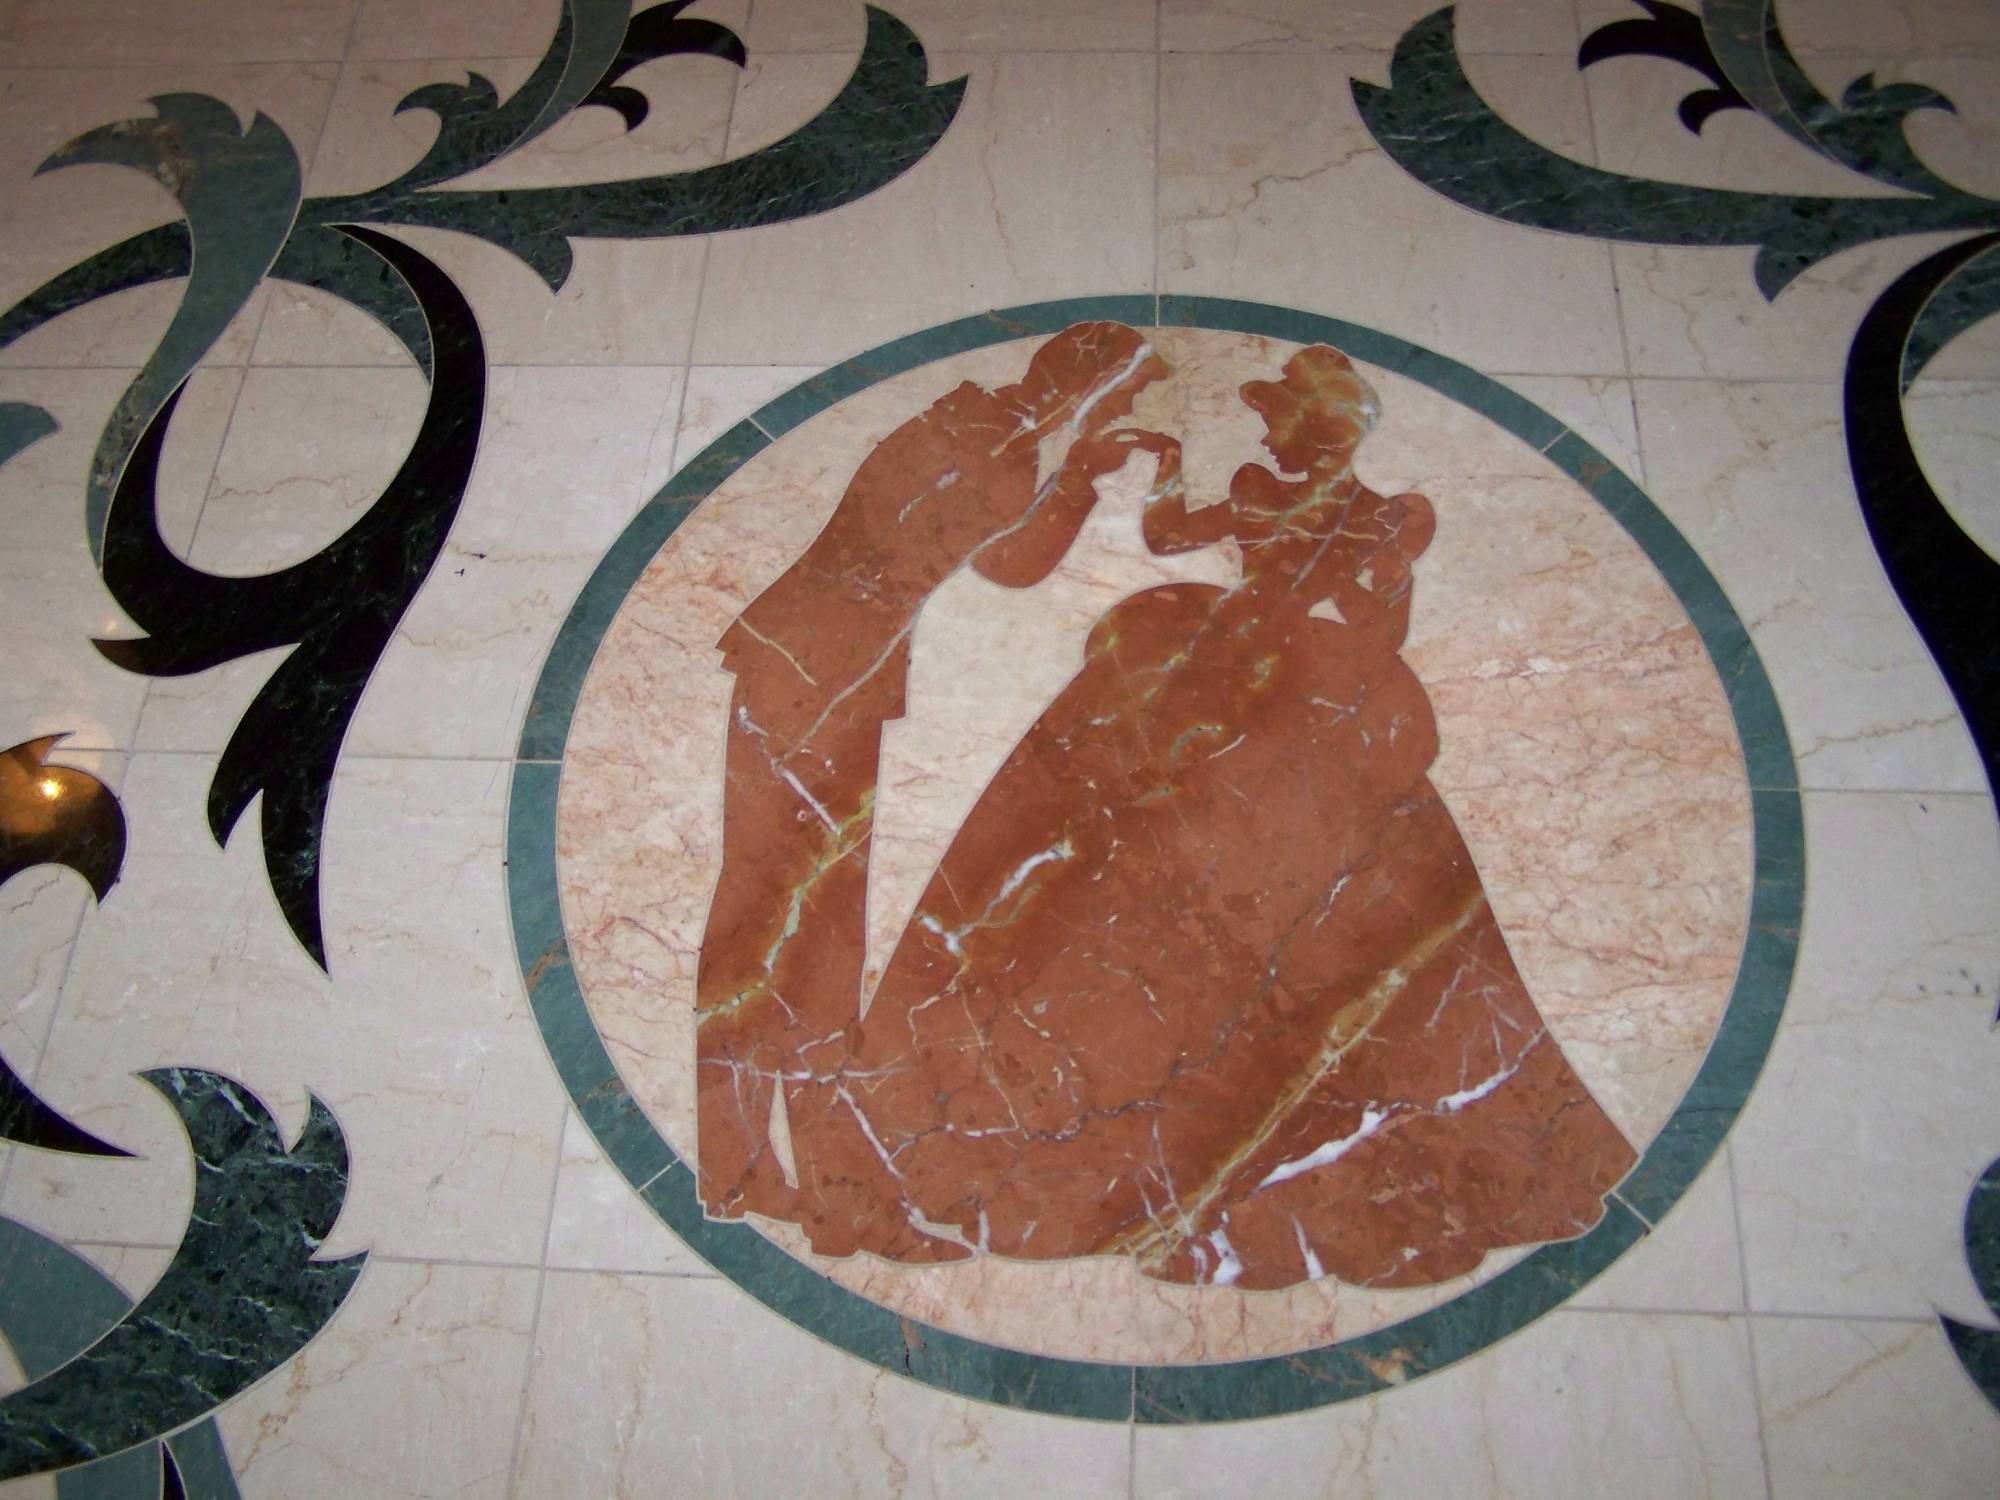 Grand Floridian Floor Lobby Prince Charming and Cinderella